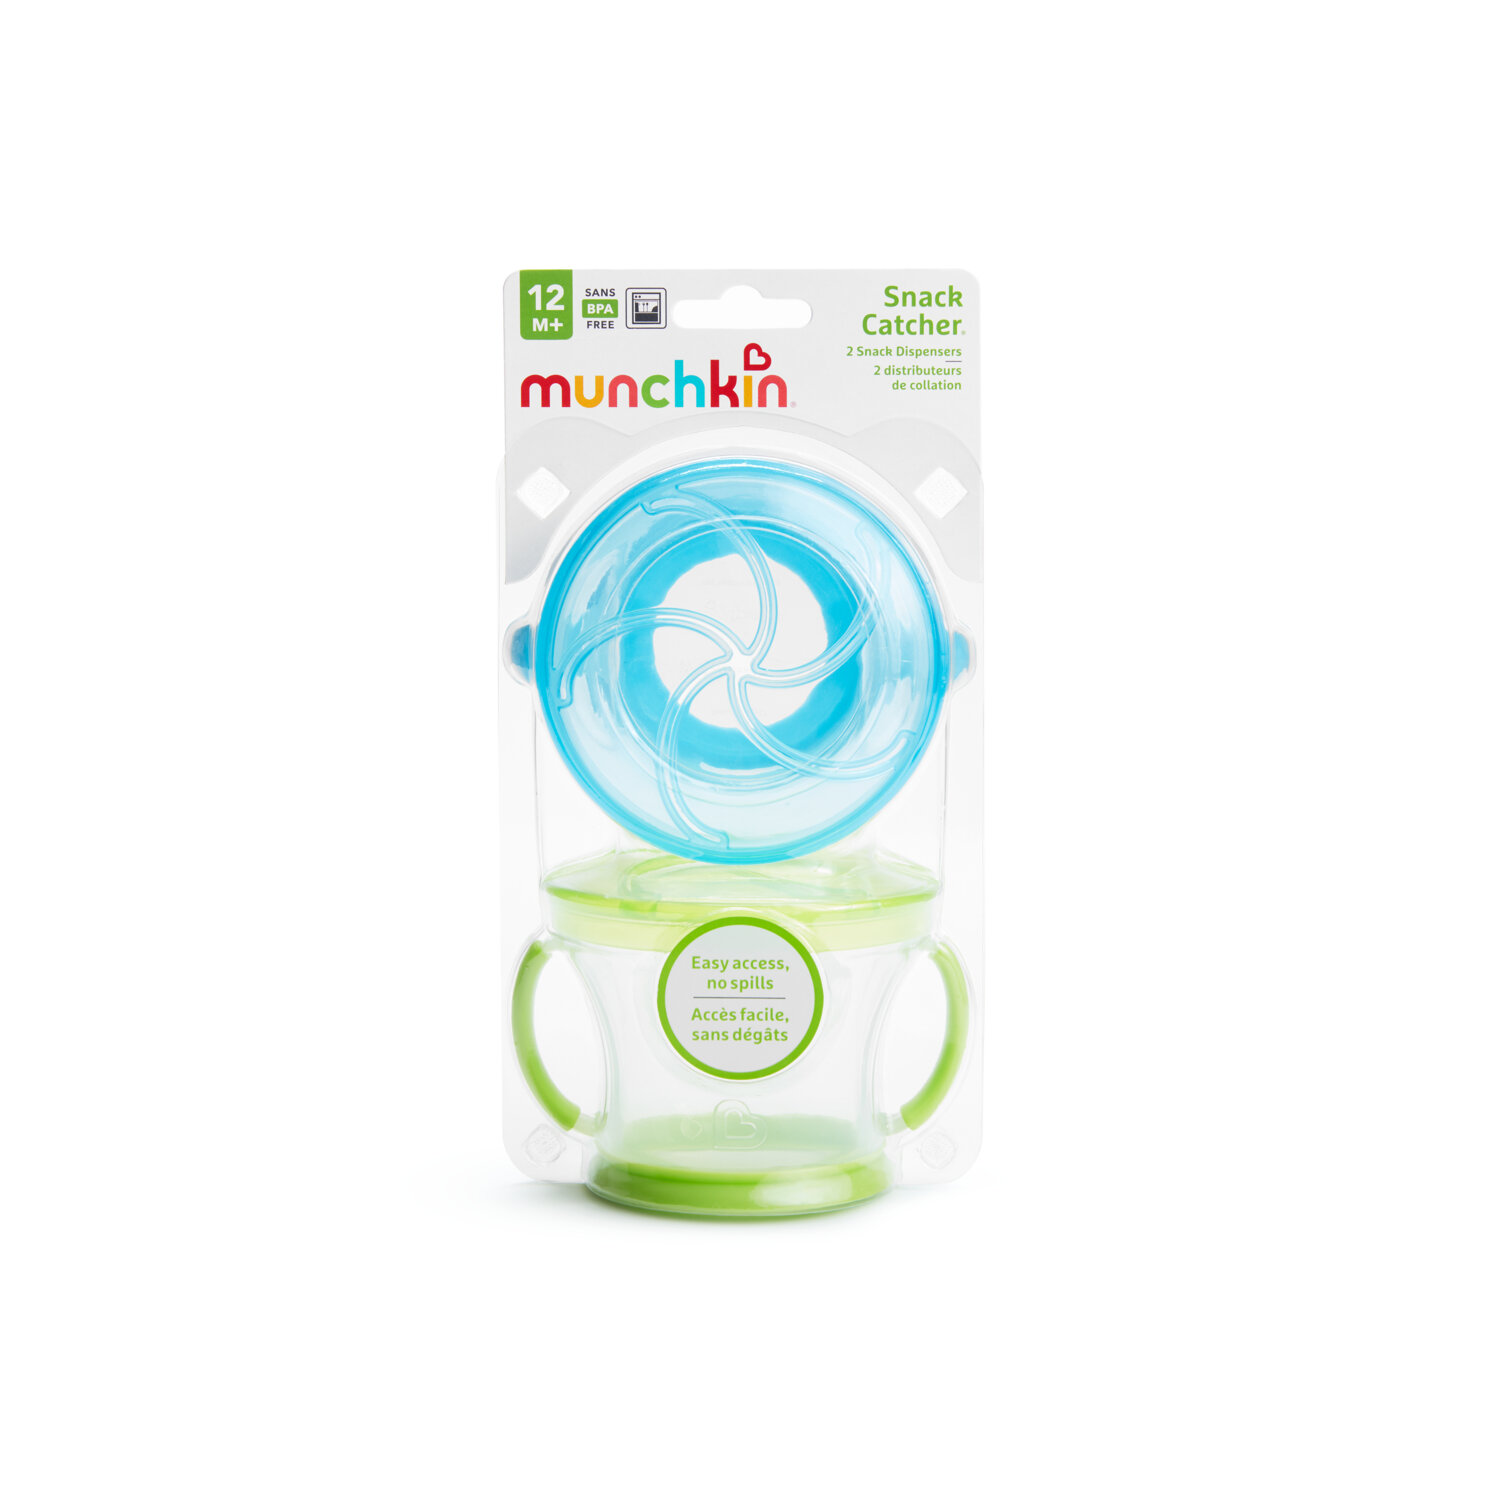  Munchkin Snack Catcher, 9 Ounce, 12+ Months, Color